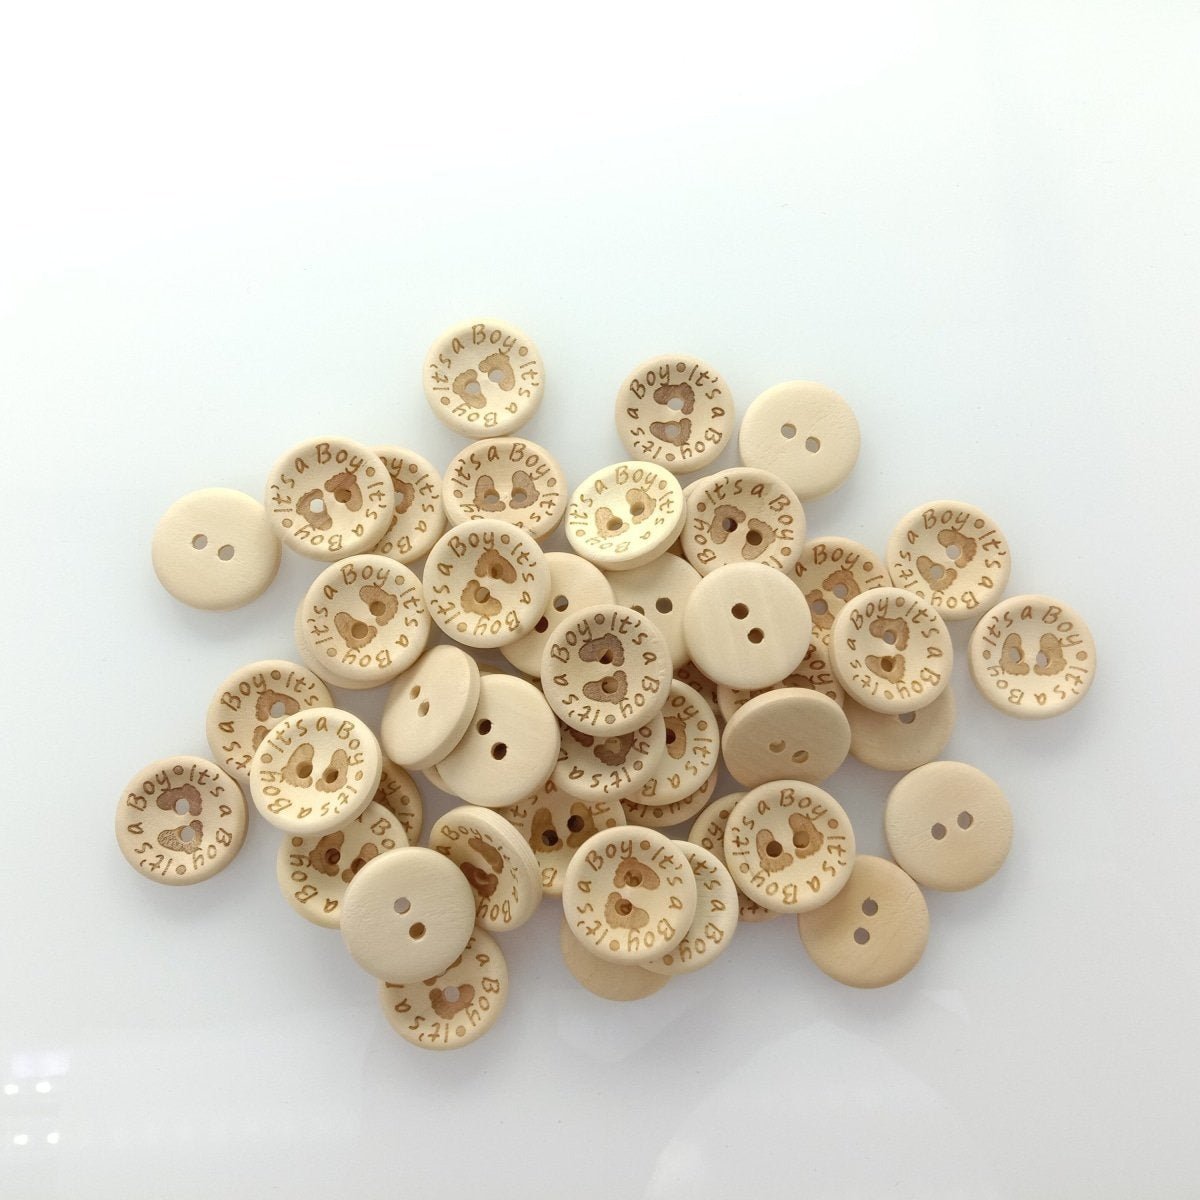 15/20/25mm It's a Girl/Boy Wooden Button Natural Wood Sewing Baby Clothing Buttons - It's a Boy 20mm 50pcs - Asia Sell